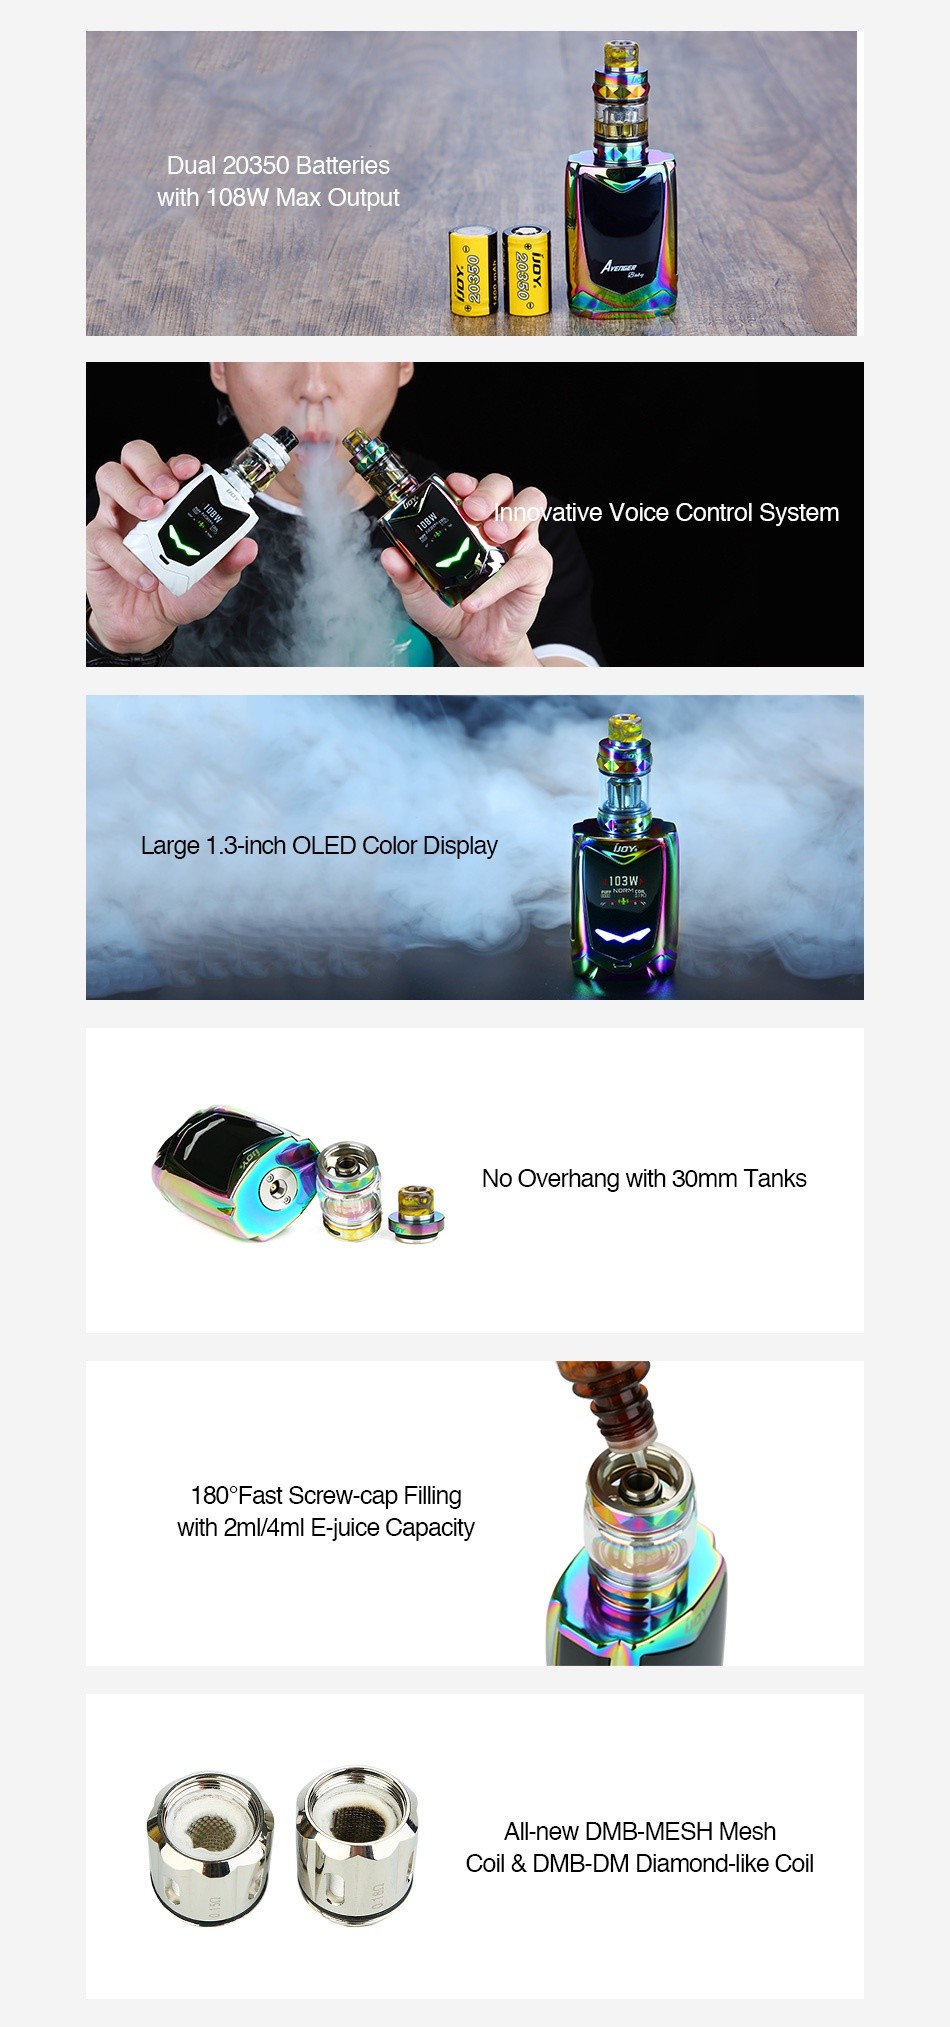 IJOY Avenger Baby 108W Voice Control TC Kit 2800mAh Dual 20350 Batteries with  108W Max Output nnovative Voice Control System Large 1 3 inch OLED Color Display No Overhang with 30mm Tanks 180  Fast Screw cap Filling with 2ml 4ml E juice Capacity All new DMB MESH Mesh coil dmb dm Diamond like coil